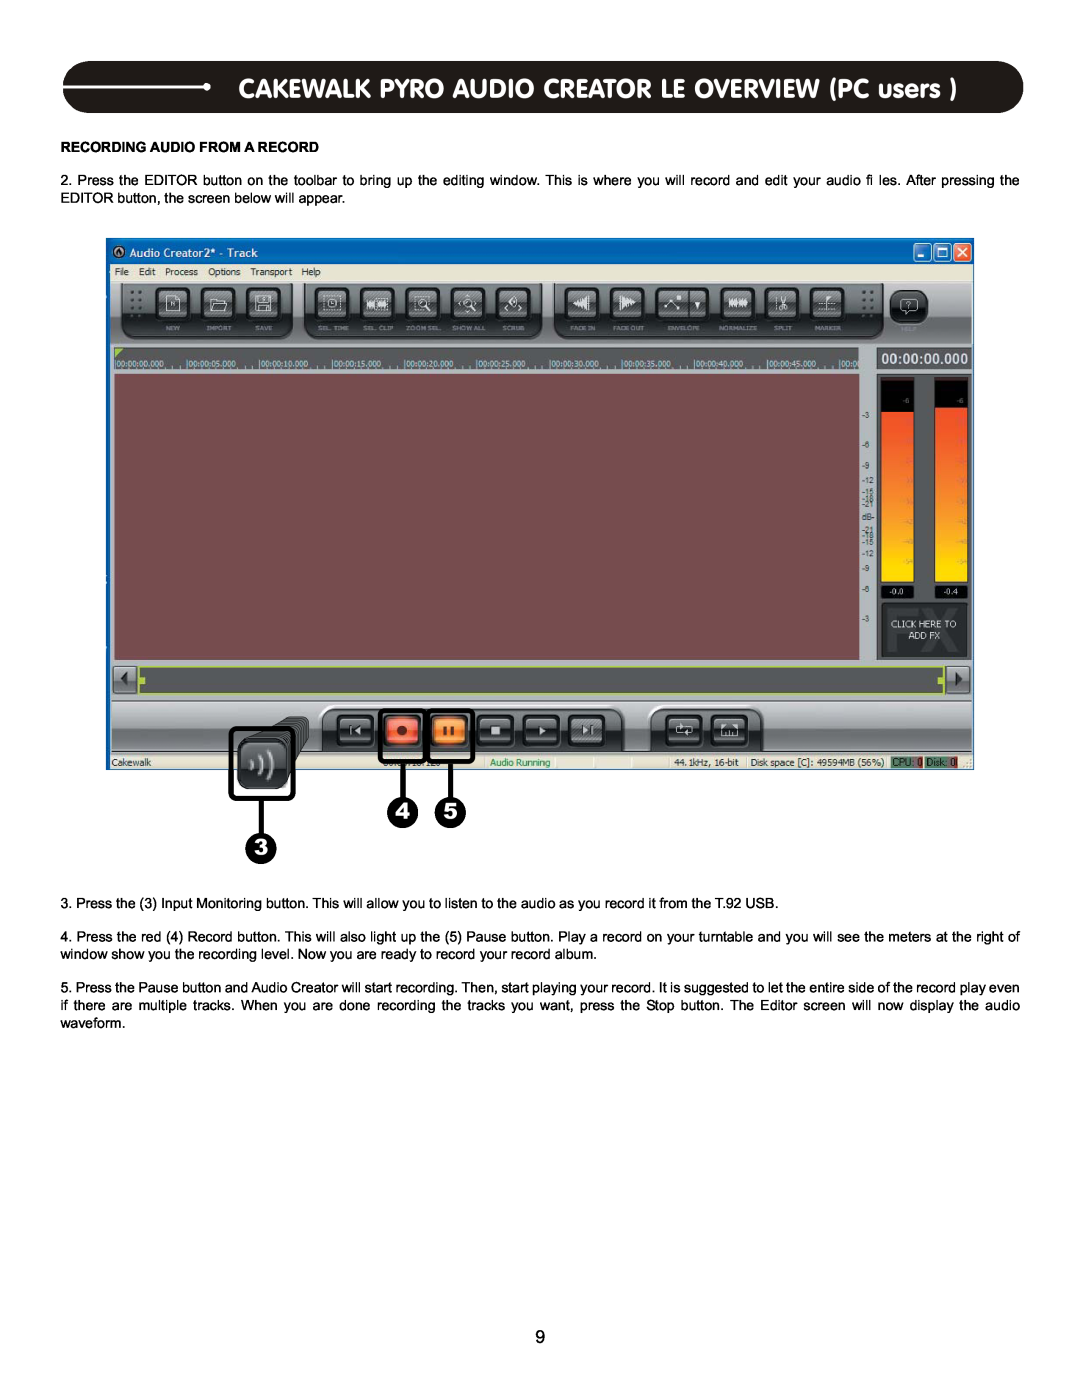 Stanton T.62 user manual  , CAKEWALK PYRO AUDIO CREATOR LE OVERVIEW PC users, Recording Audio From A Record 